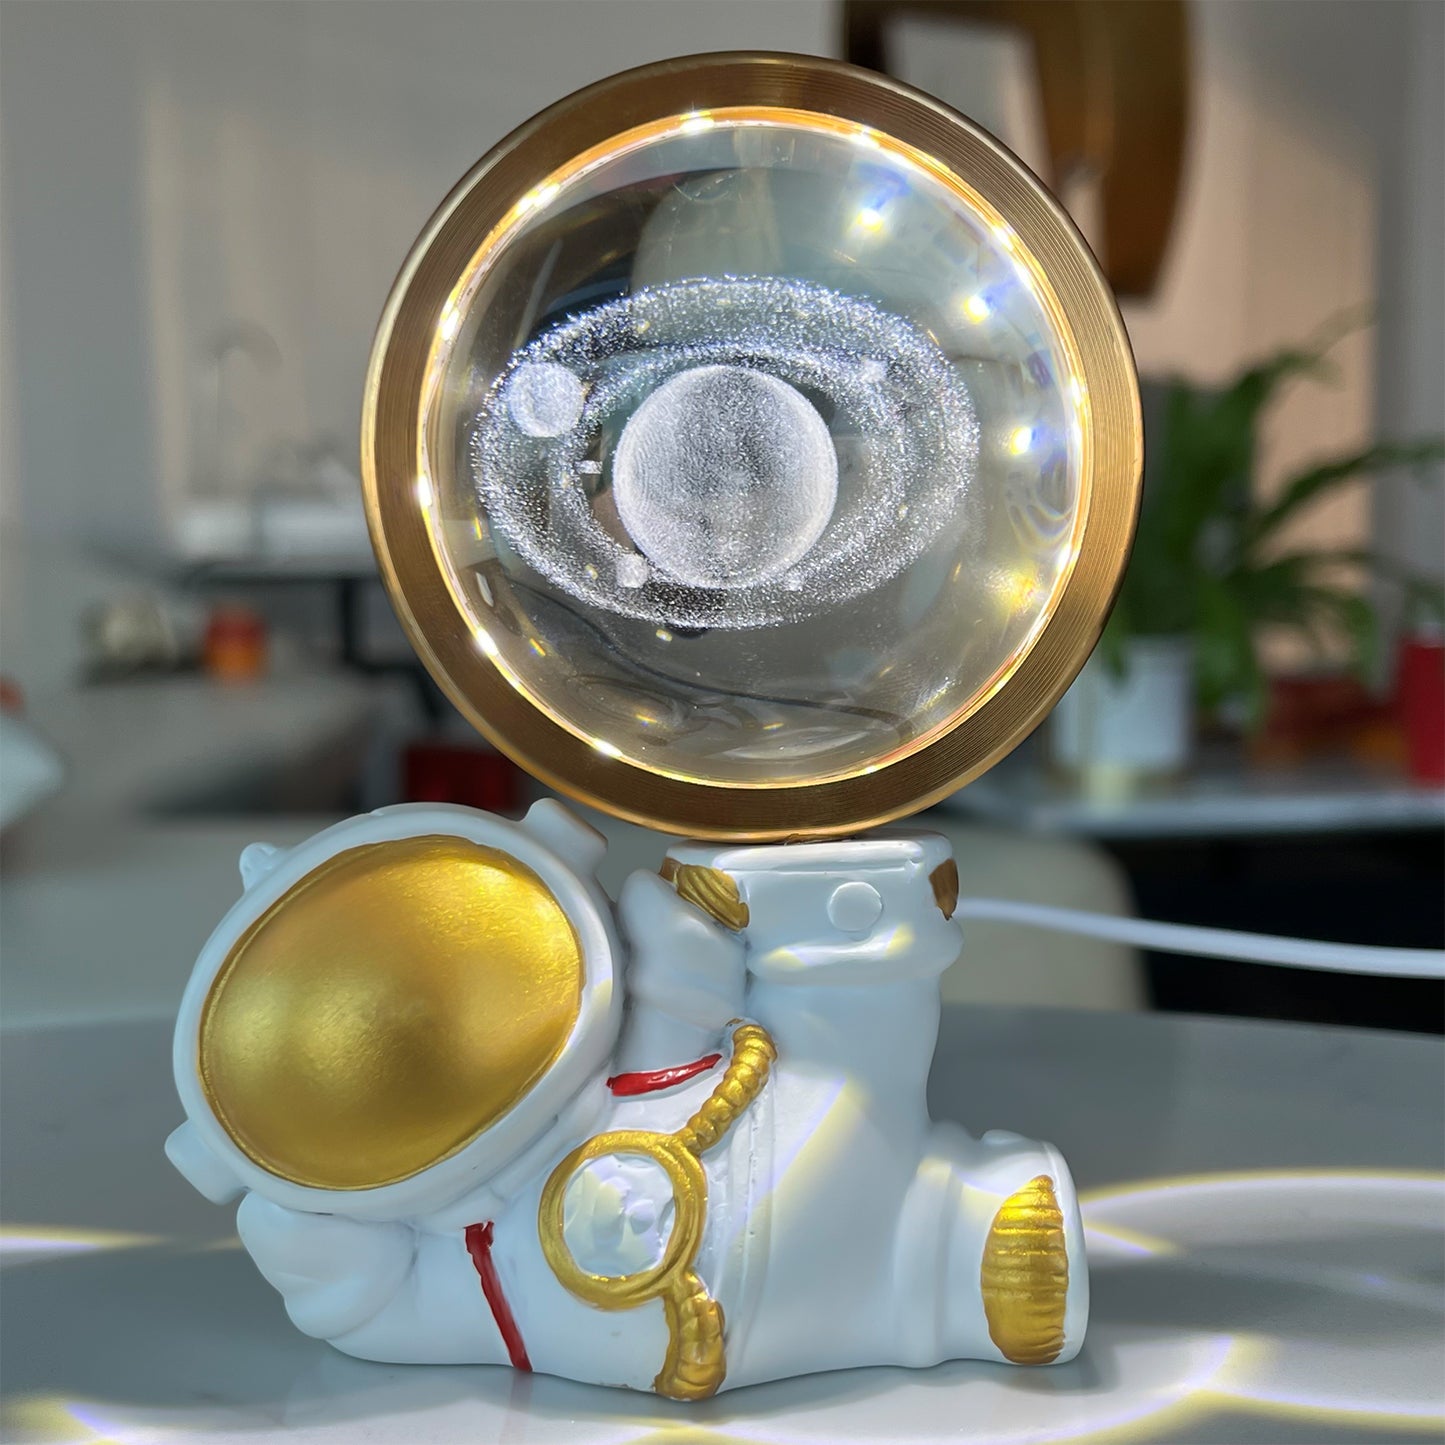 3D Planet Crystal Ball,Figurine Night Light with LED Light,Astronaut Holding Decoration,5.1in Tall,rotating crystal ball,Fancy Gift, Planets Sphere,Birthday,Room Deco,Valentine's Day, Mother's Day